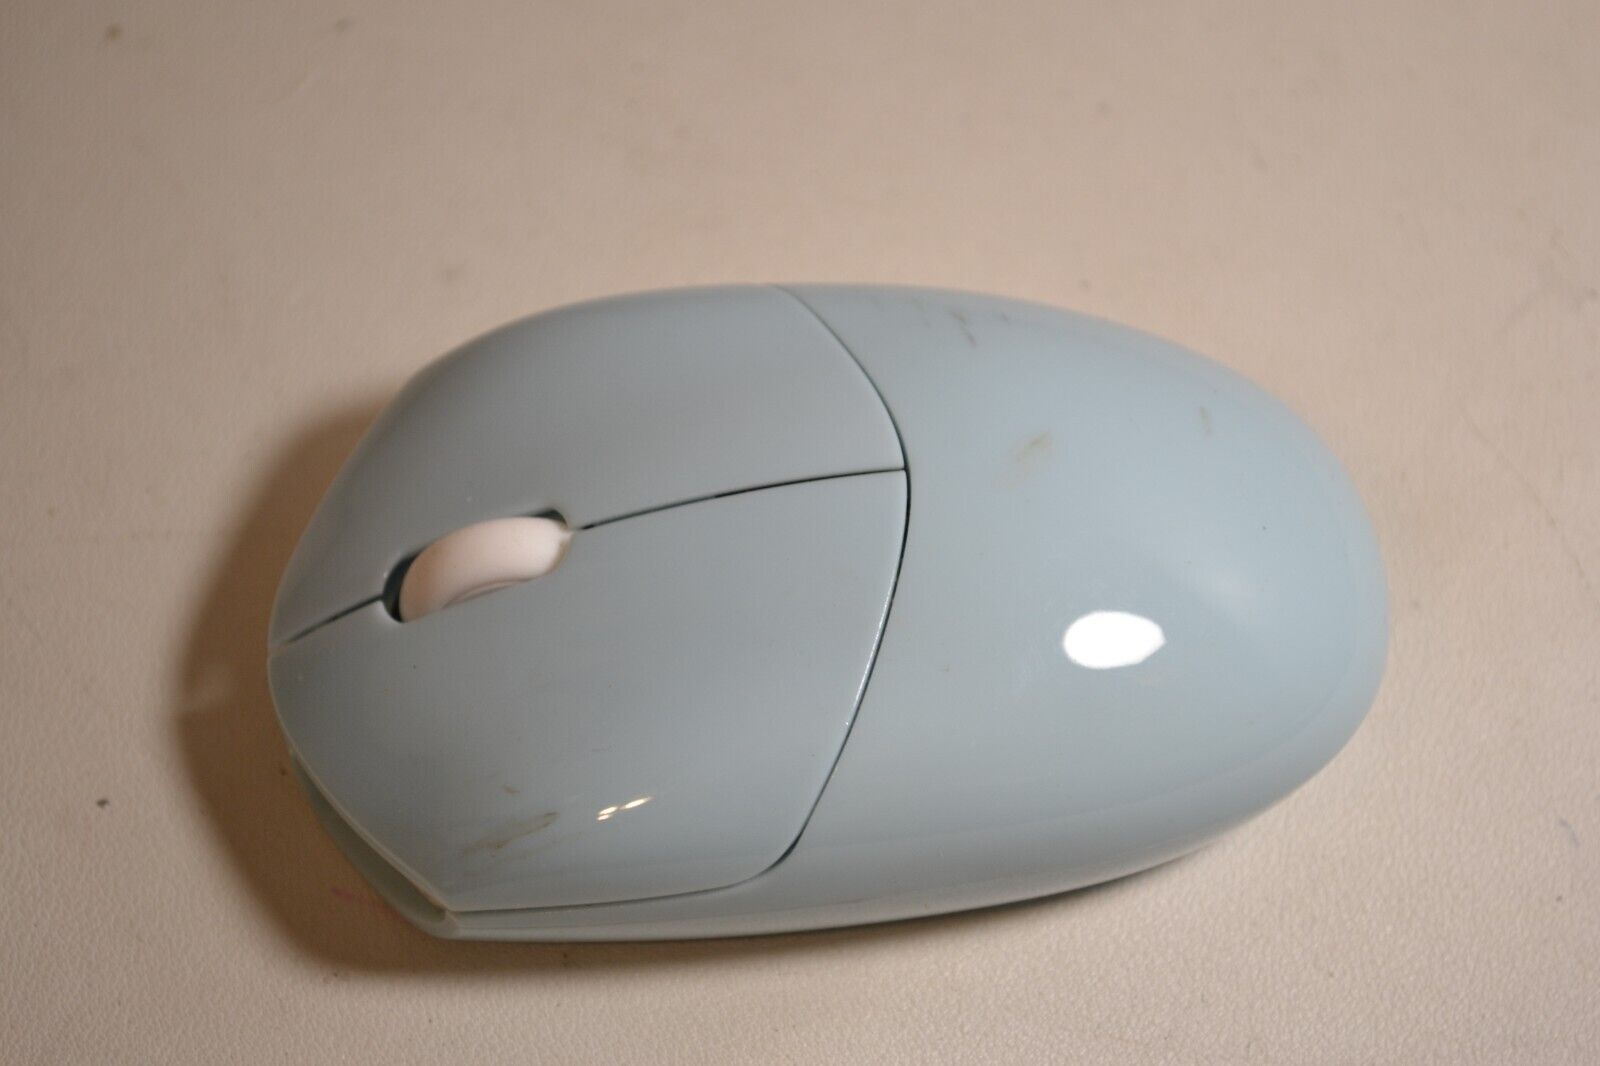 MOFii Blue Wireless Optical Mouse w/Receiver Model: Sweet